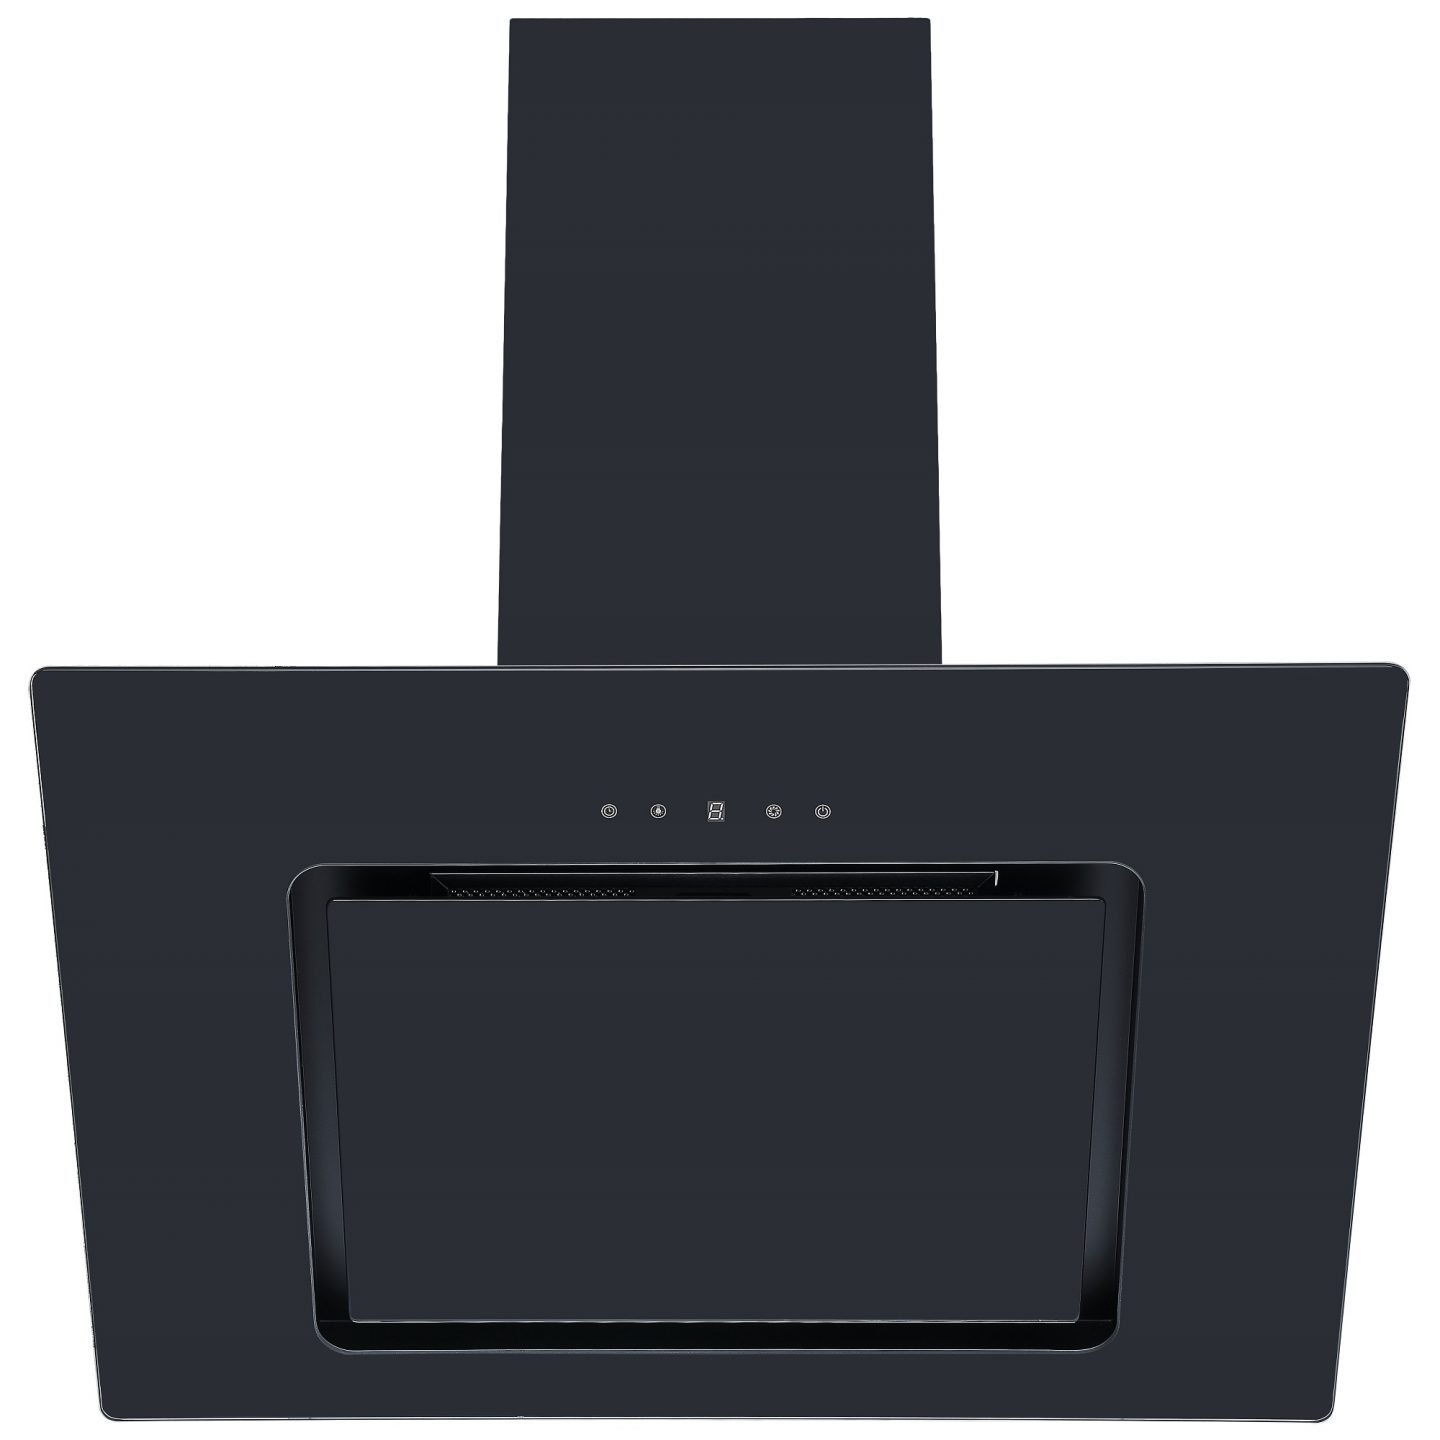 Cookology VER705BK 70cm Black Angled Glass Cooker Hood Touch Controls & Ducting 